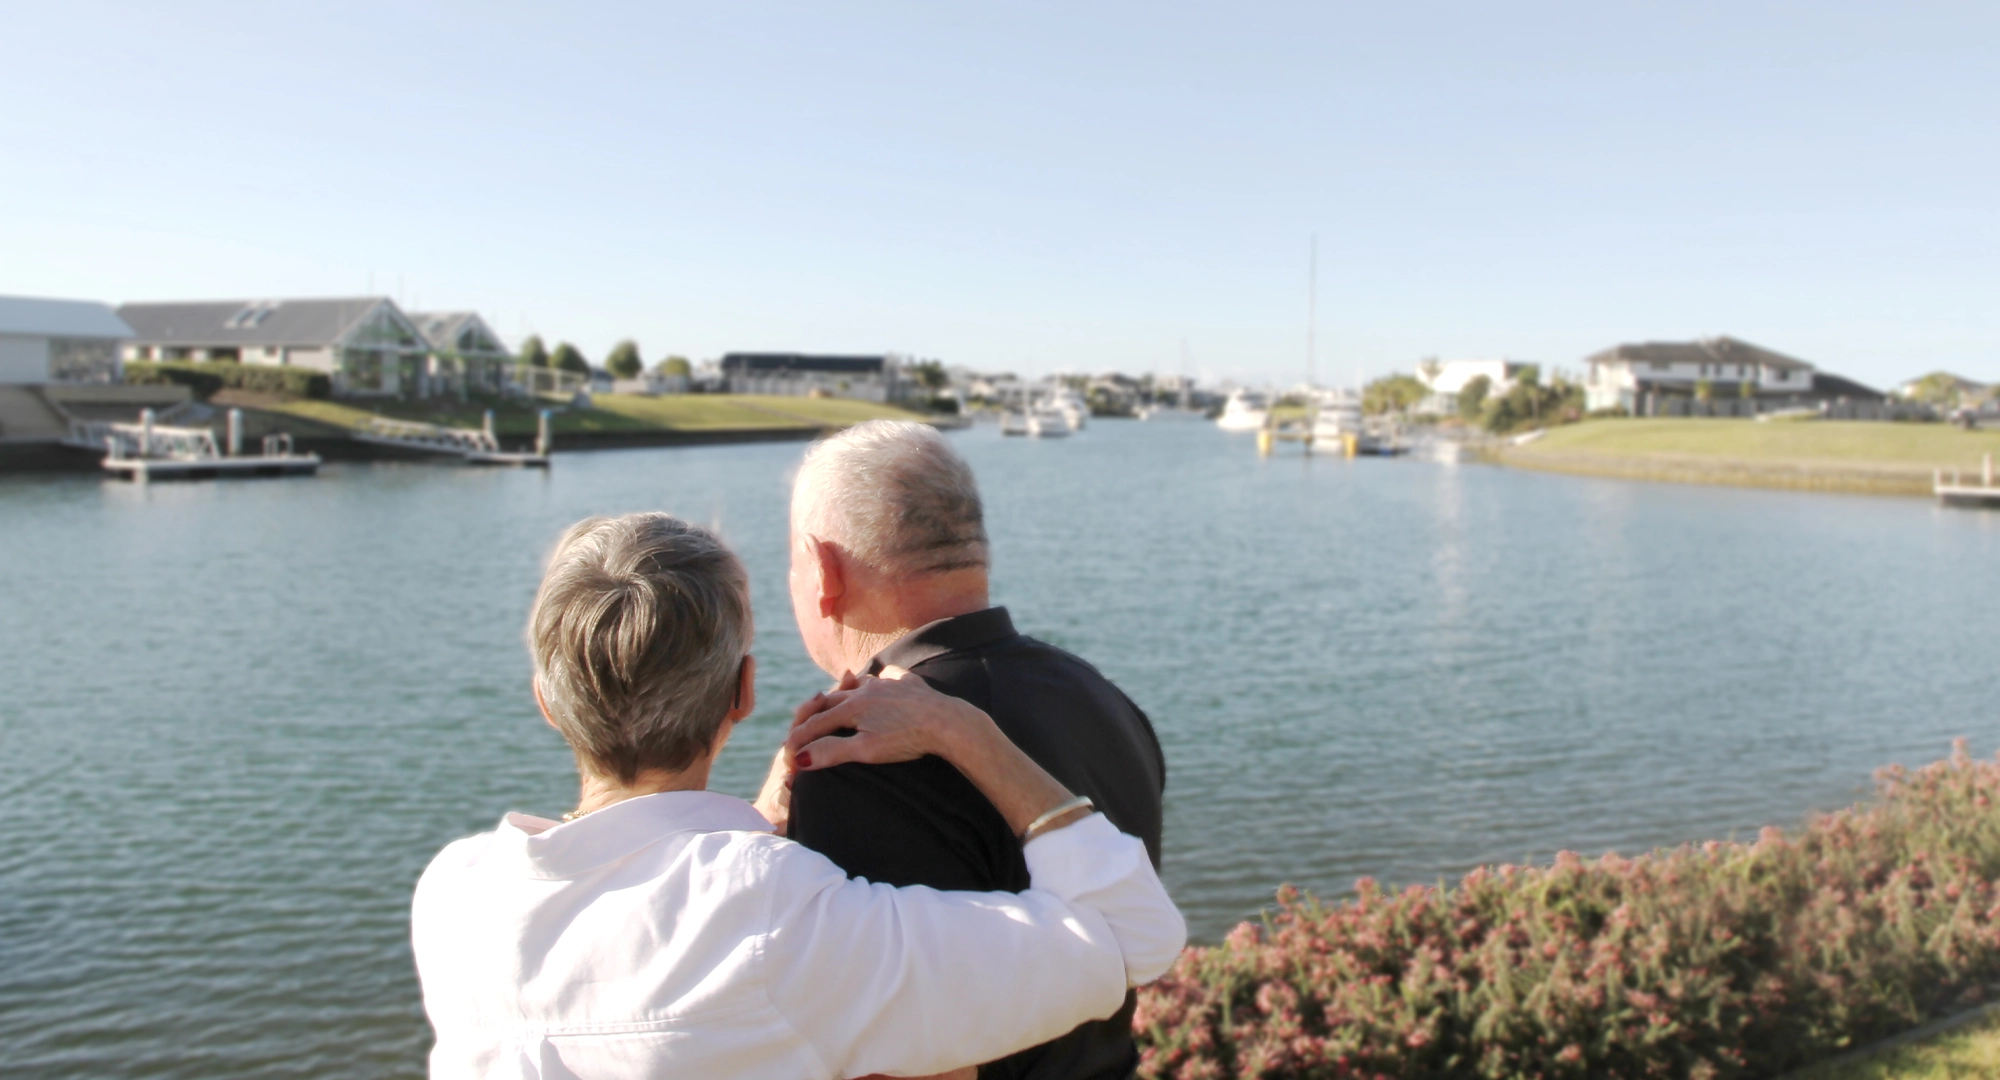 Mature couple embracing overlooking the water